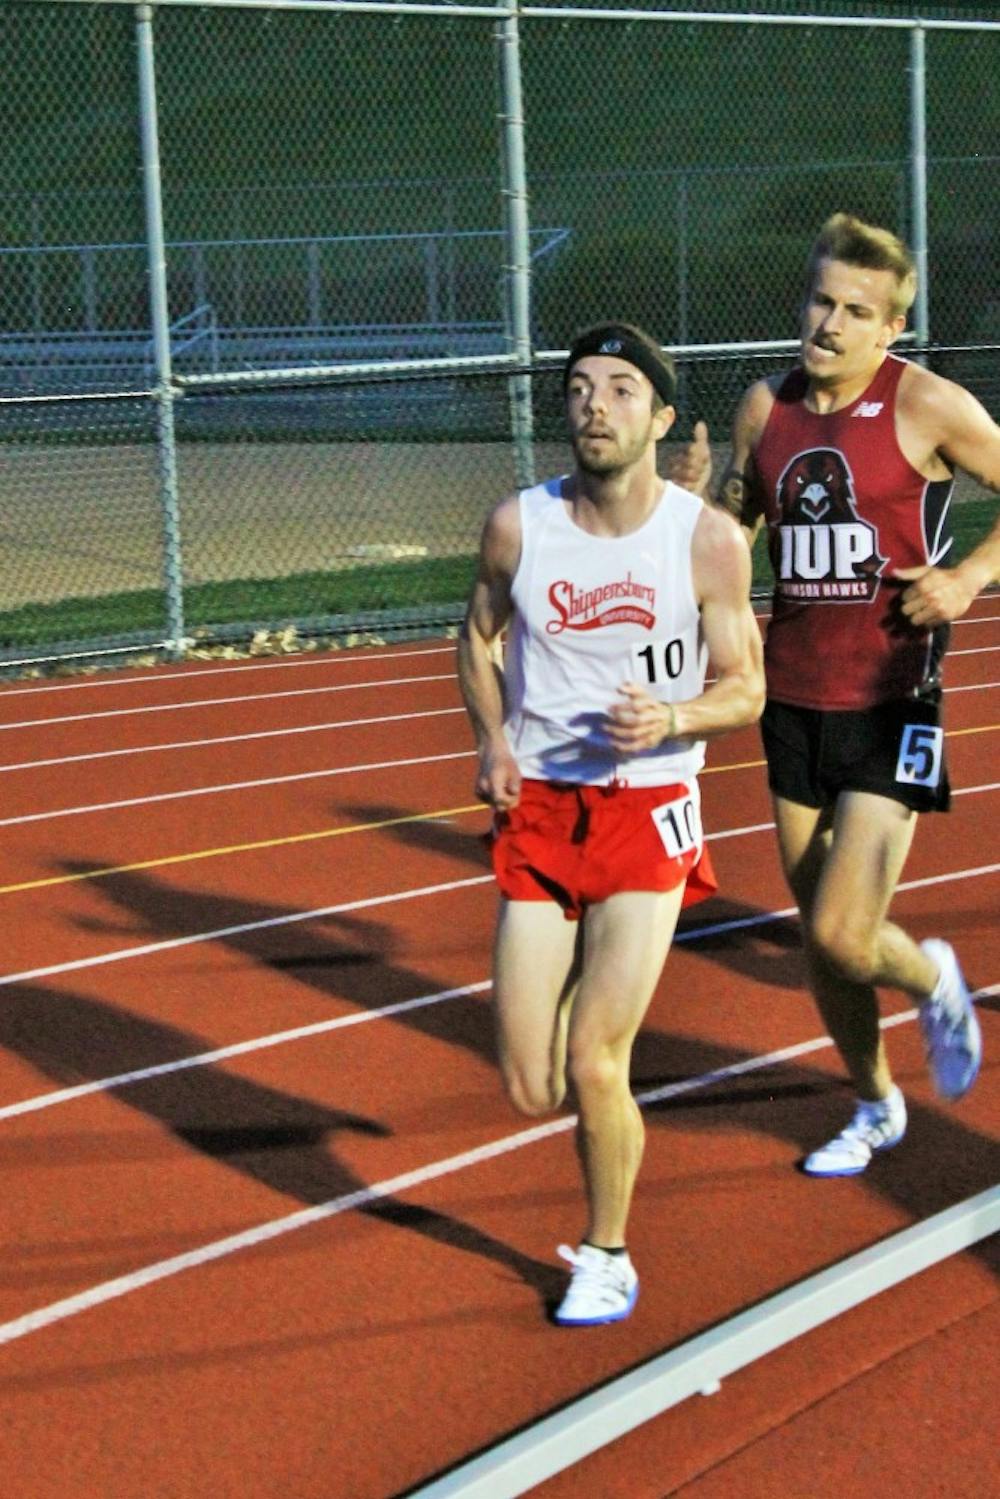 SU men’s outdoor track-and-field-team claims first PSAC title in the 10K